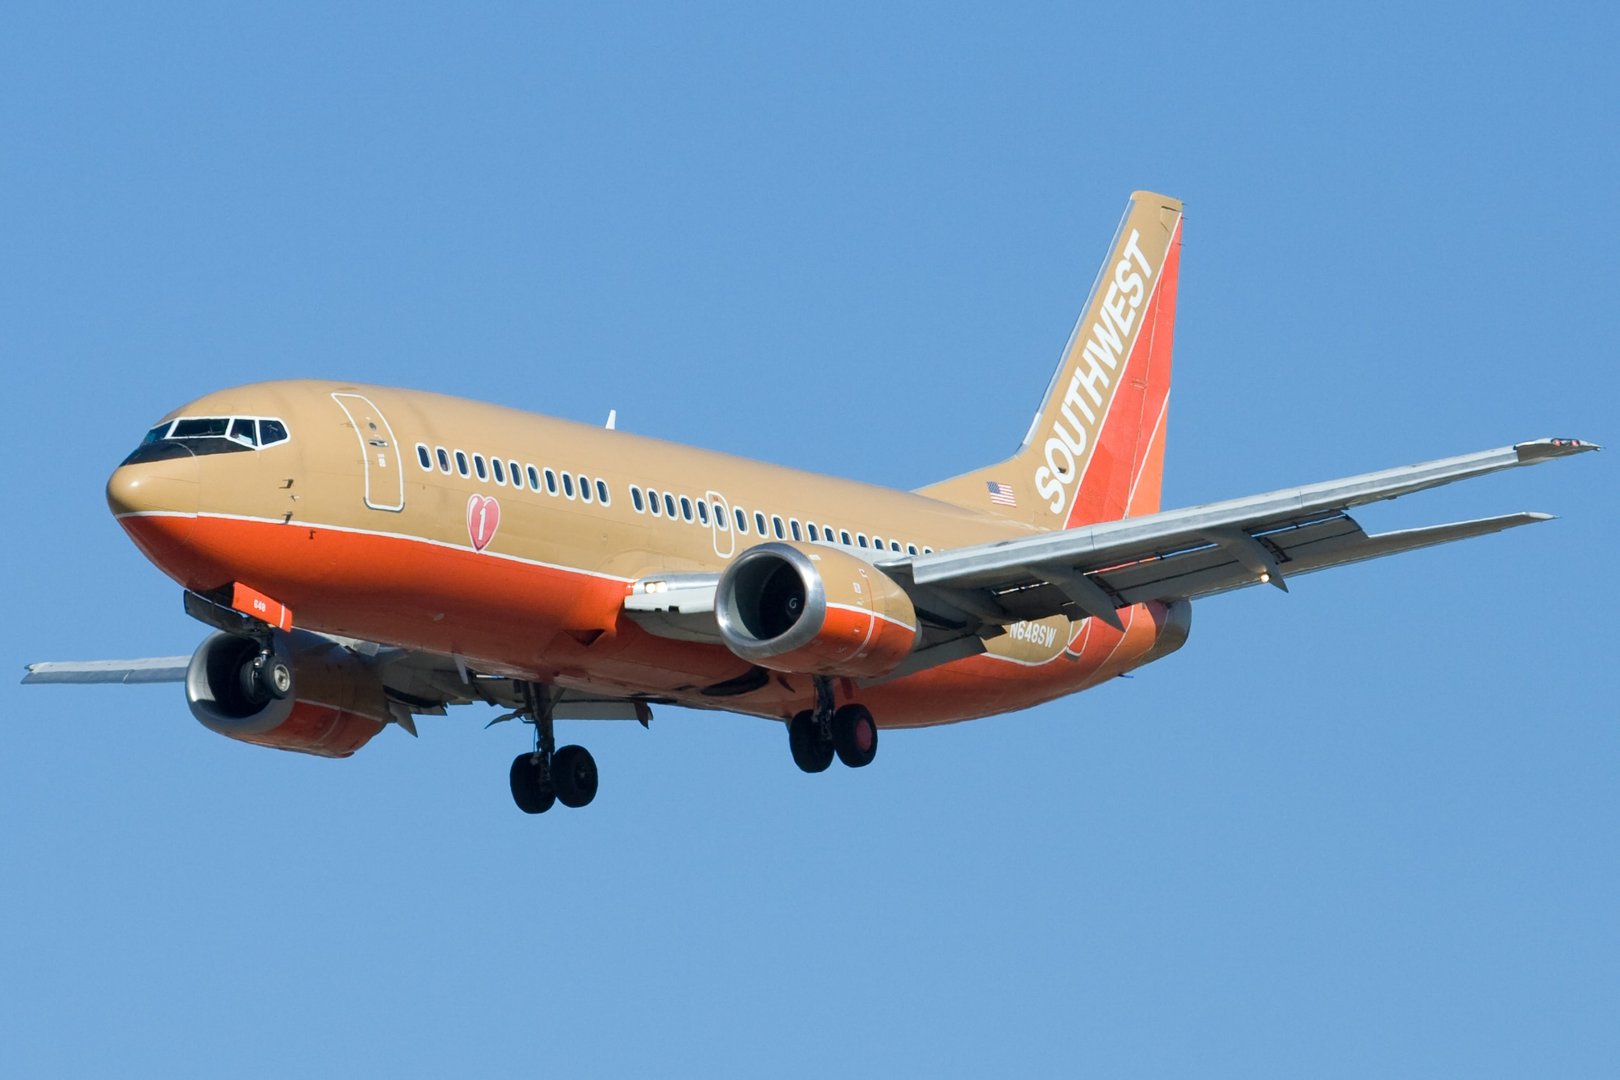 image Boeing 737-800 loses engine cover during takeoff, prompts FAA investigation